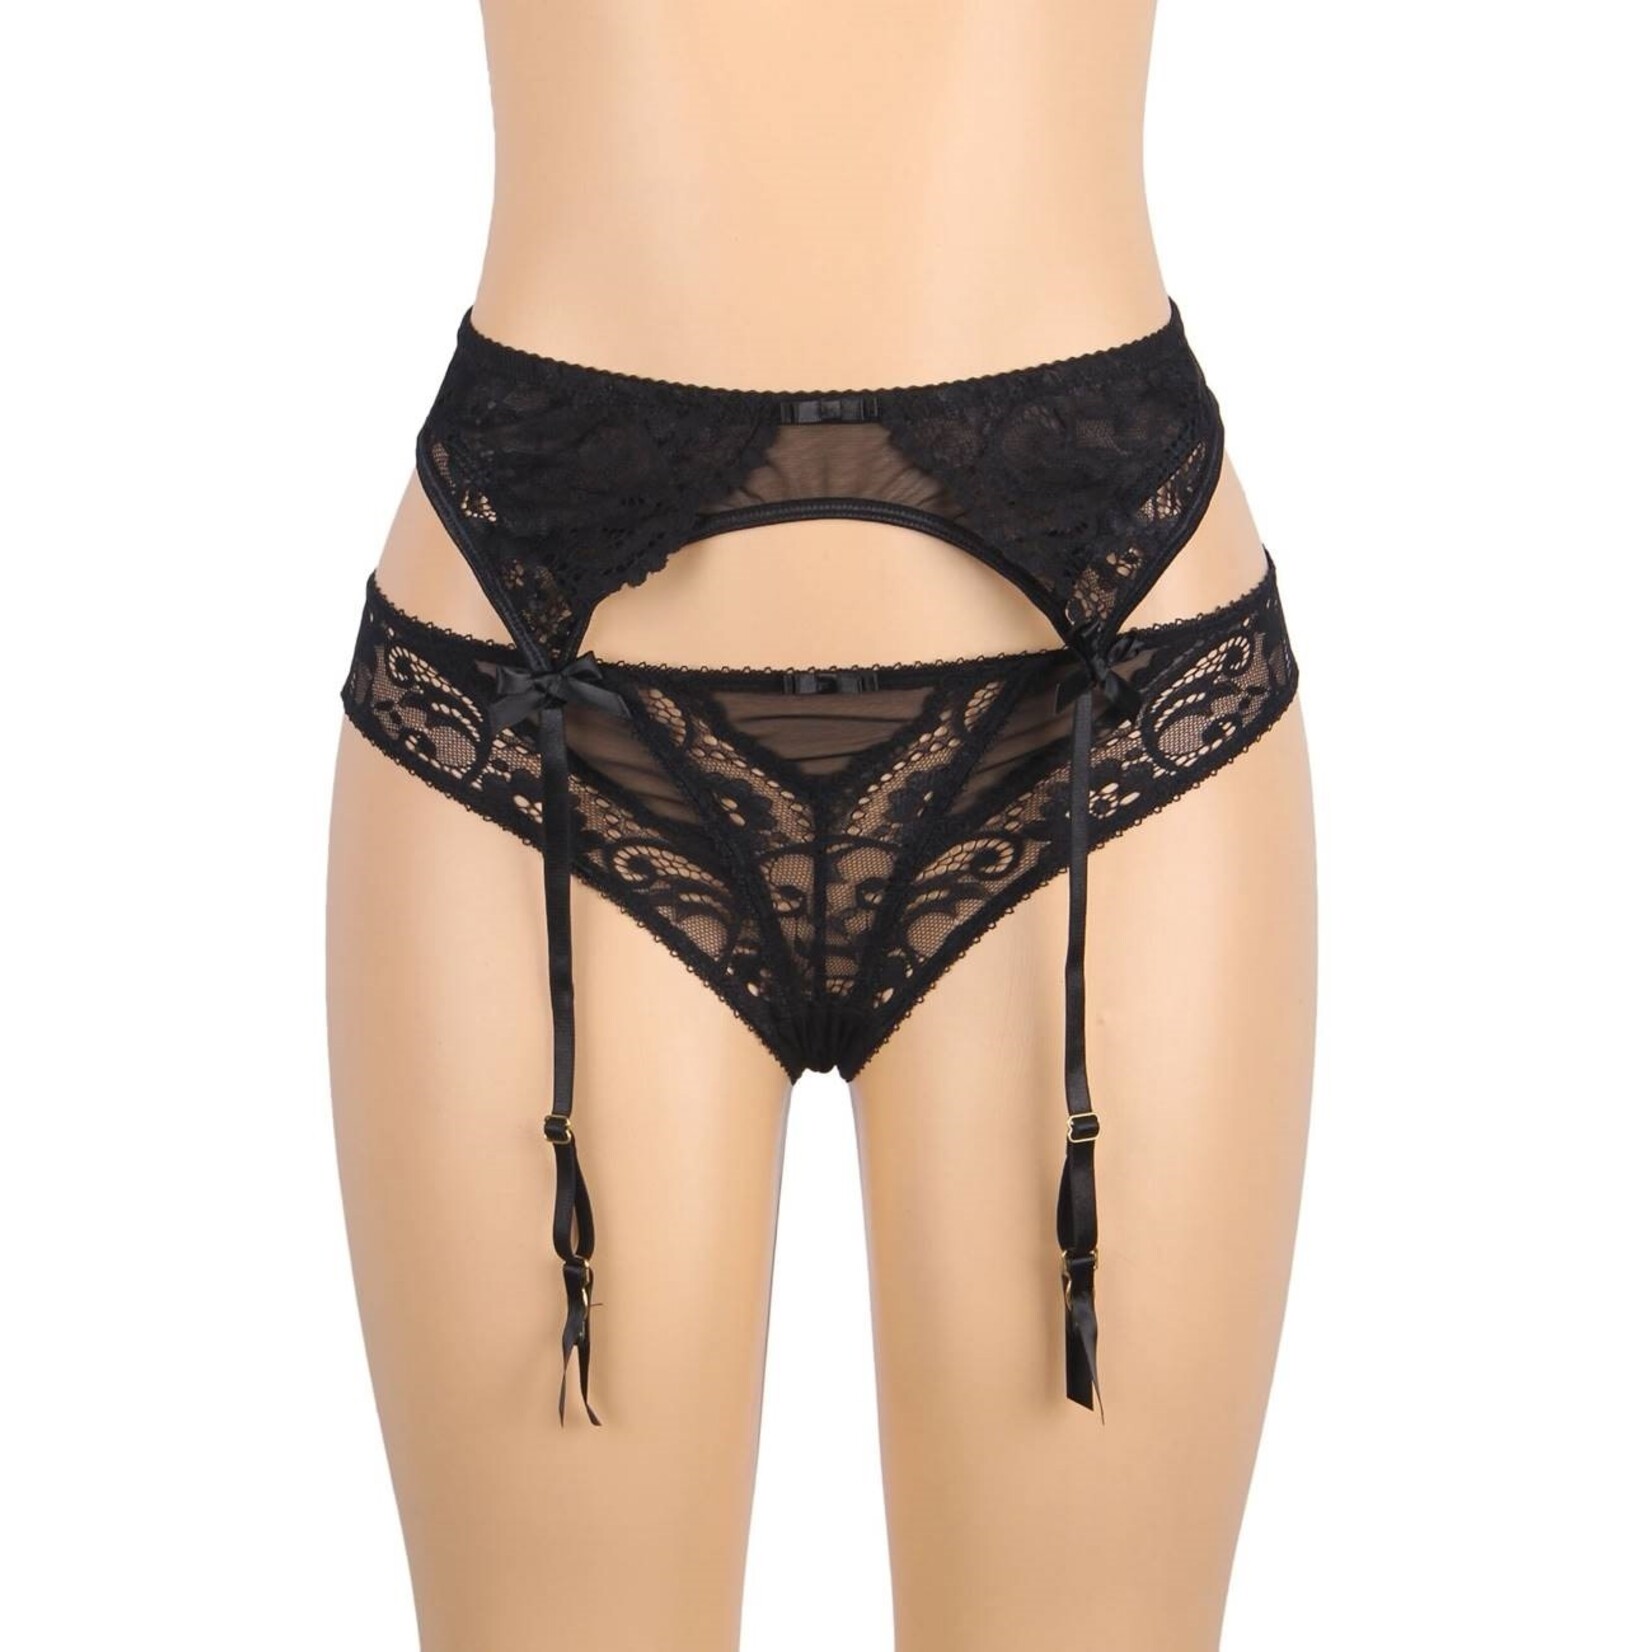 OH YEAH! -  SEXY EXQUISITE LACE PLUS SIZE GARTER PANTY XL-2XL